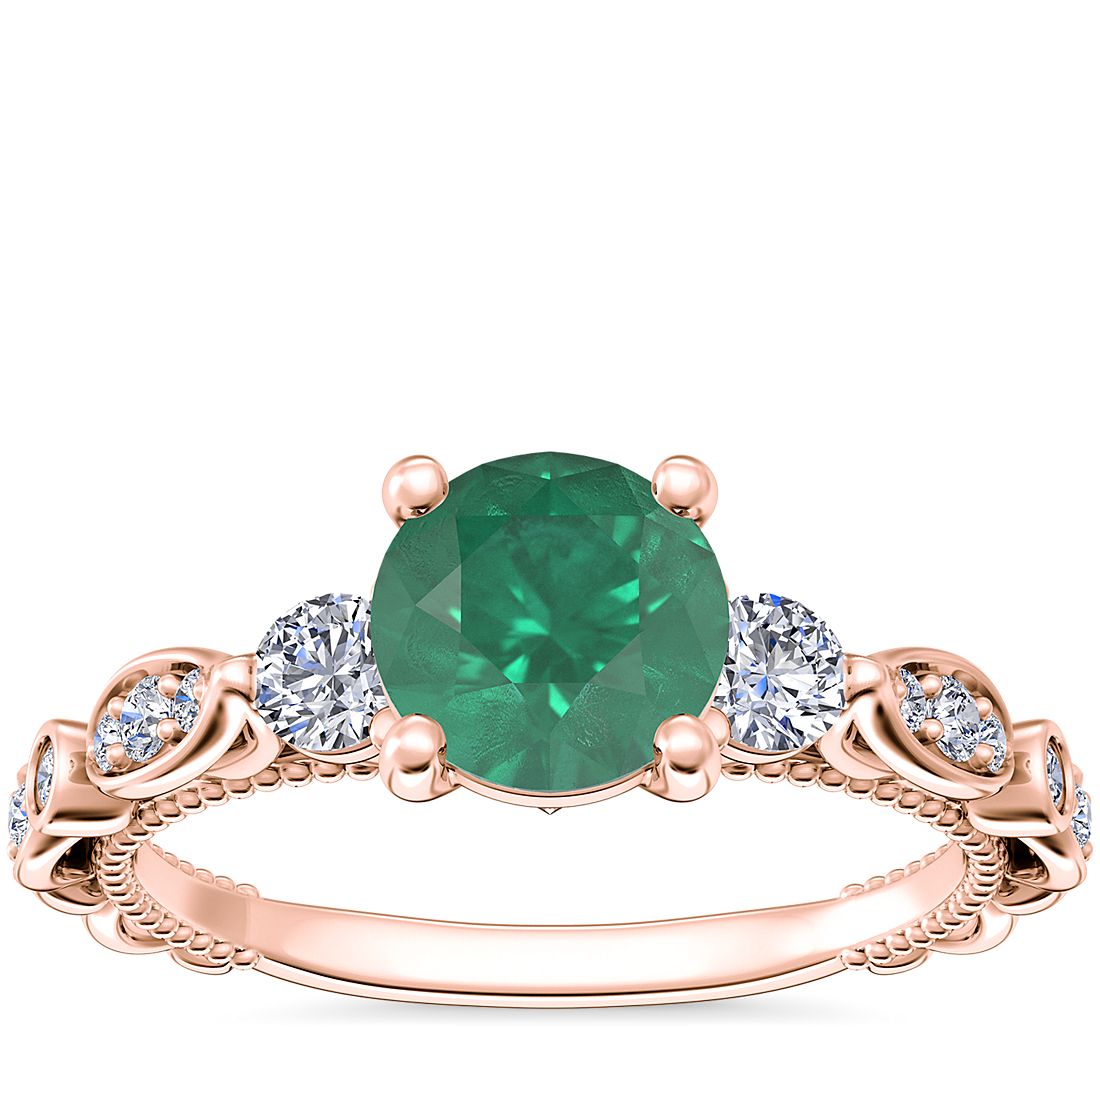 Floral Ellipse Diamond Cathedral Engagement Ring with Round Emerald in 14k Rose Gold (6.5mm)